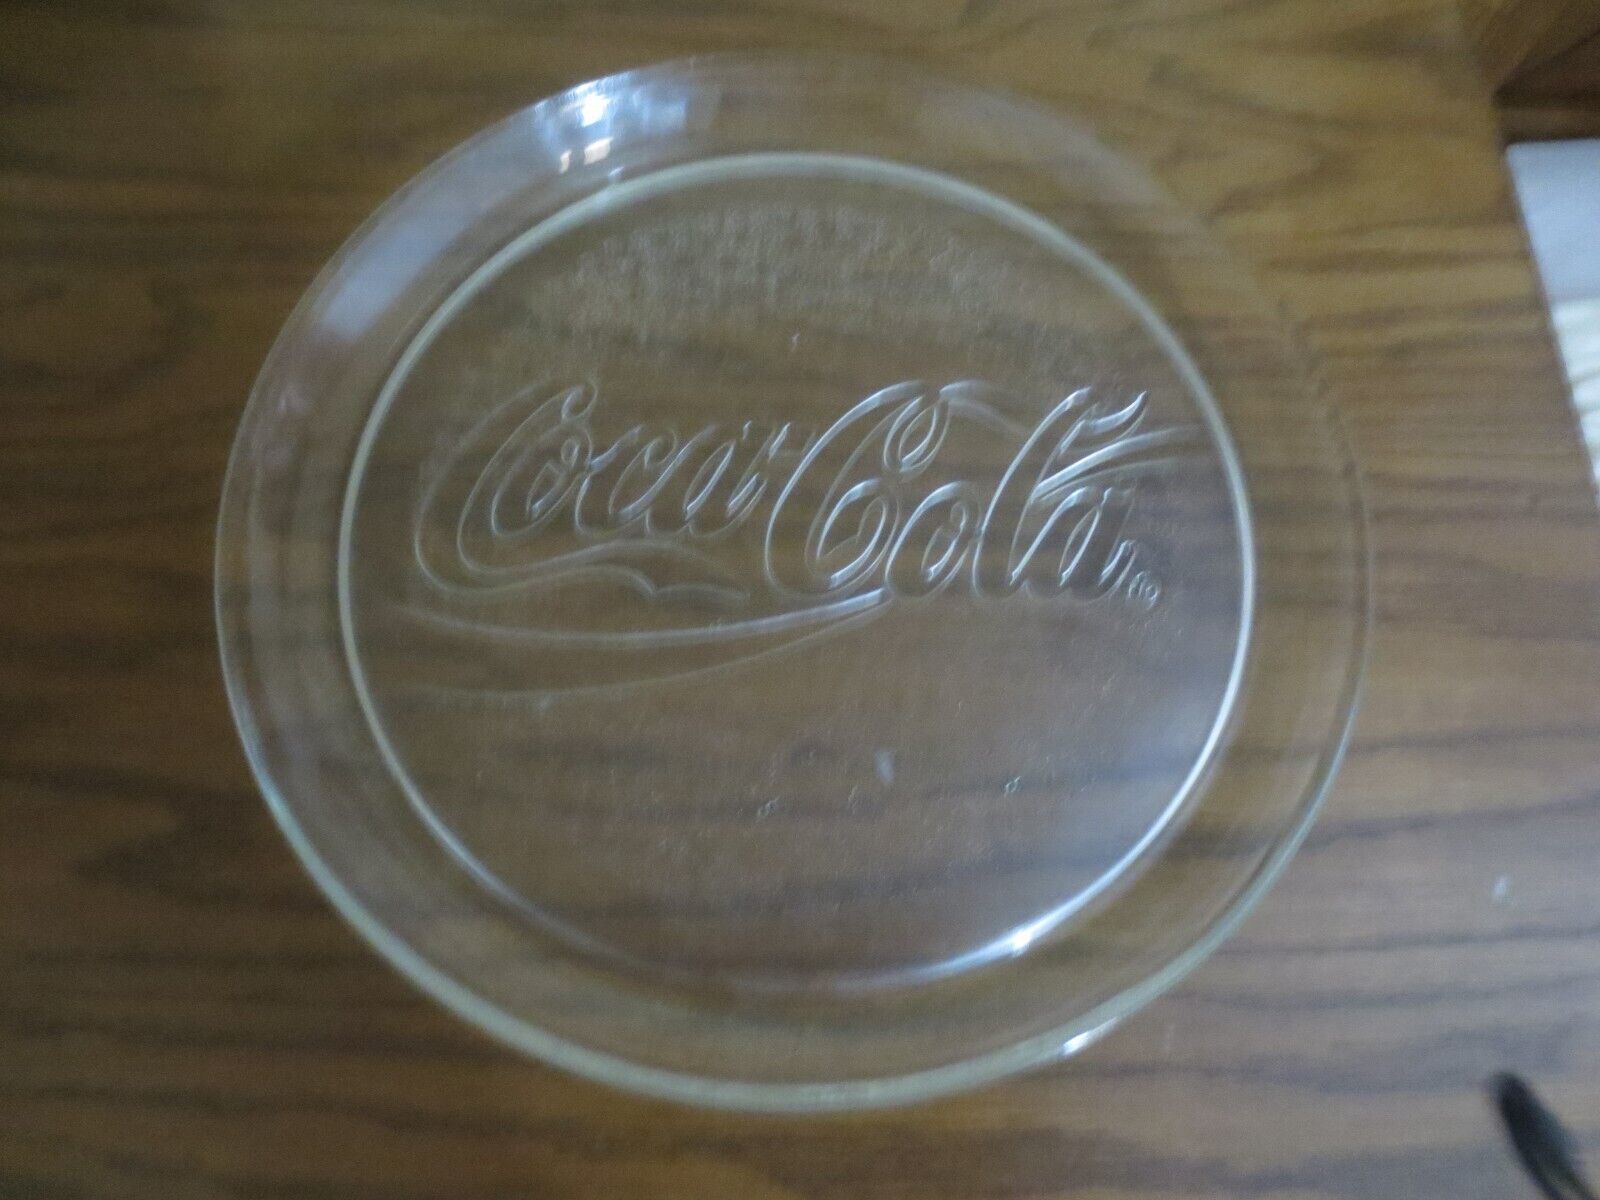 Coca-Cola with Swirl Glass Plate Platter Serving Piece 13" - $18.32